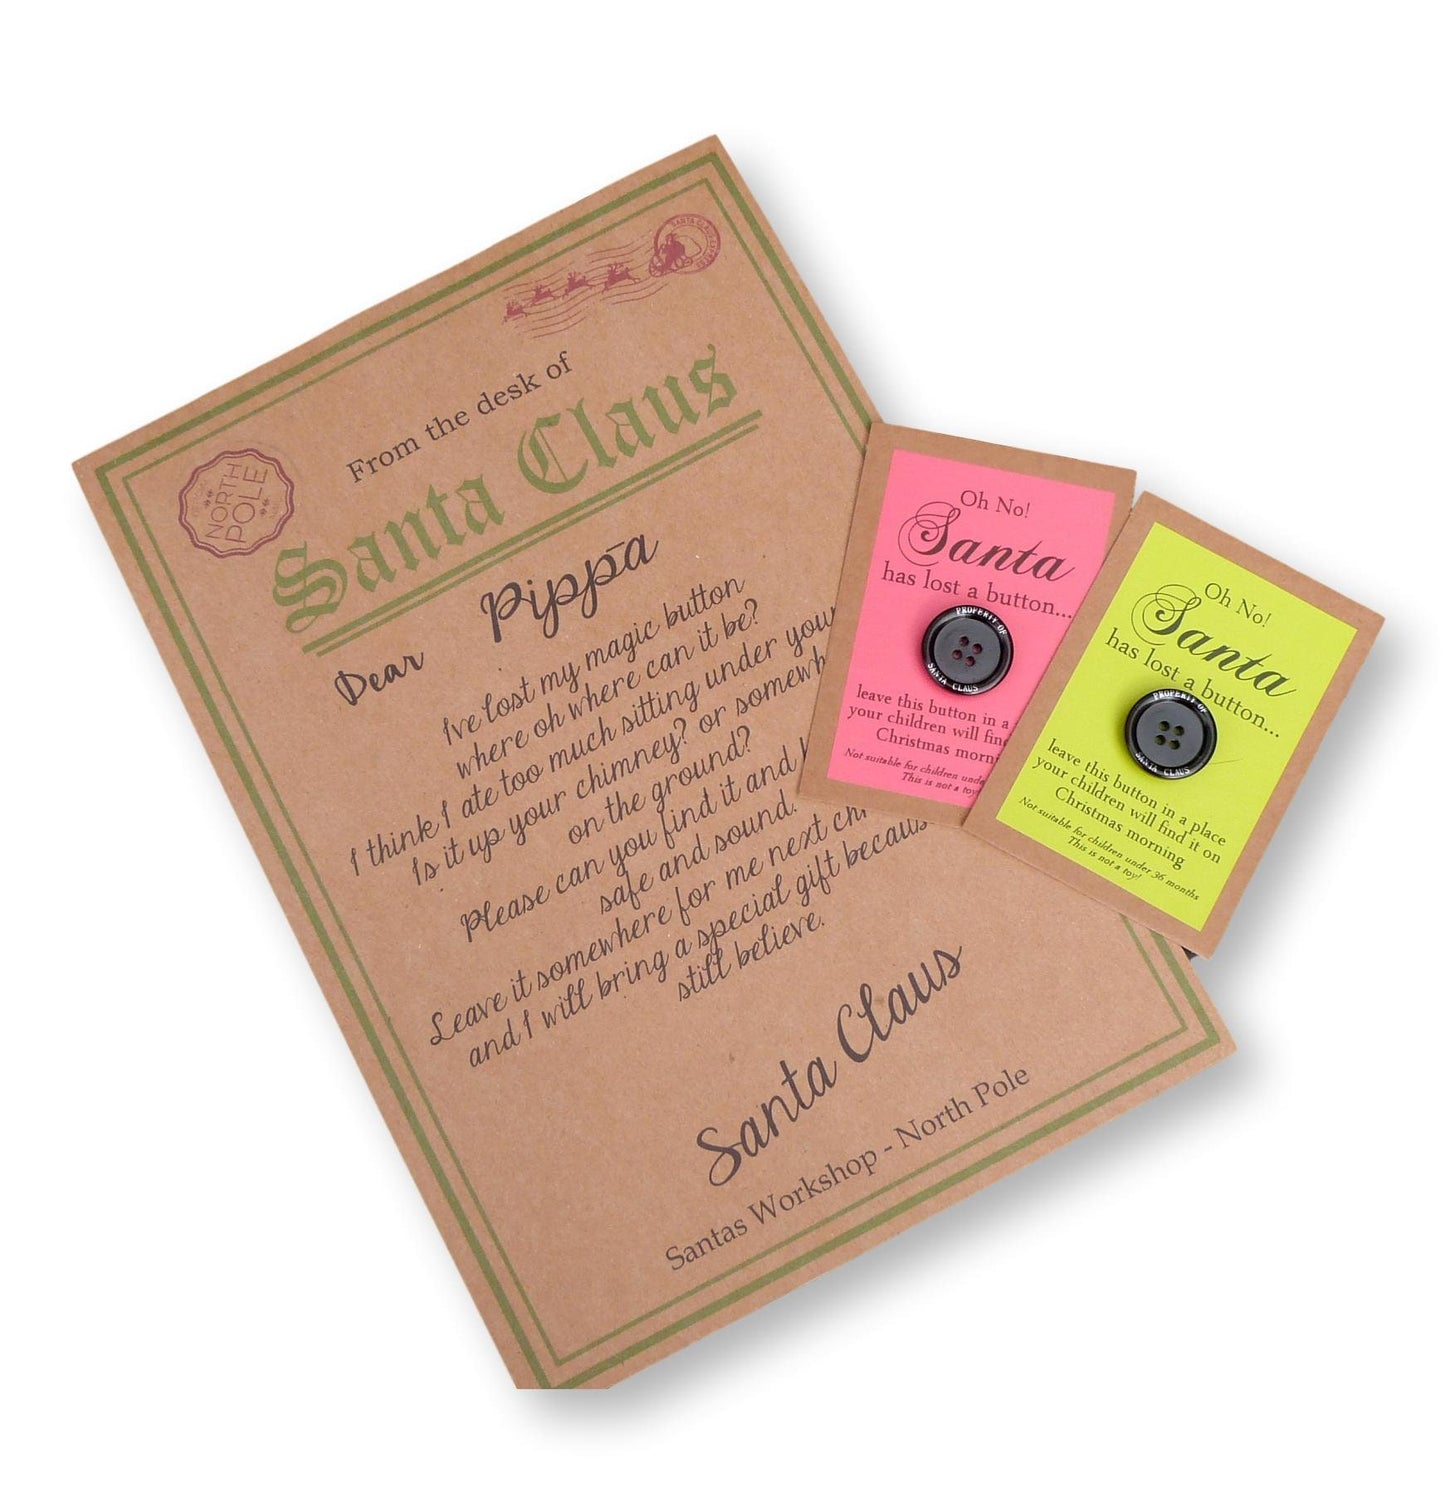 Santa’s Lost Button card, personalised letter christmas eve christmas day activity father christmas scroll box